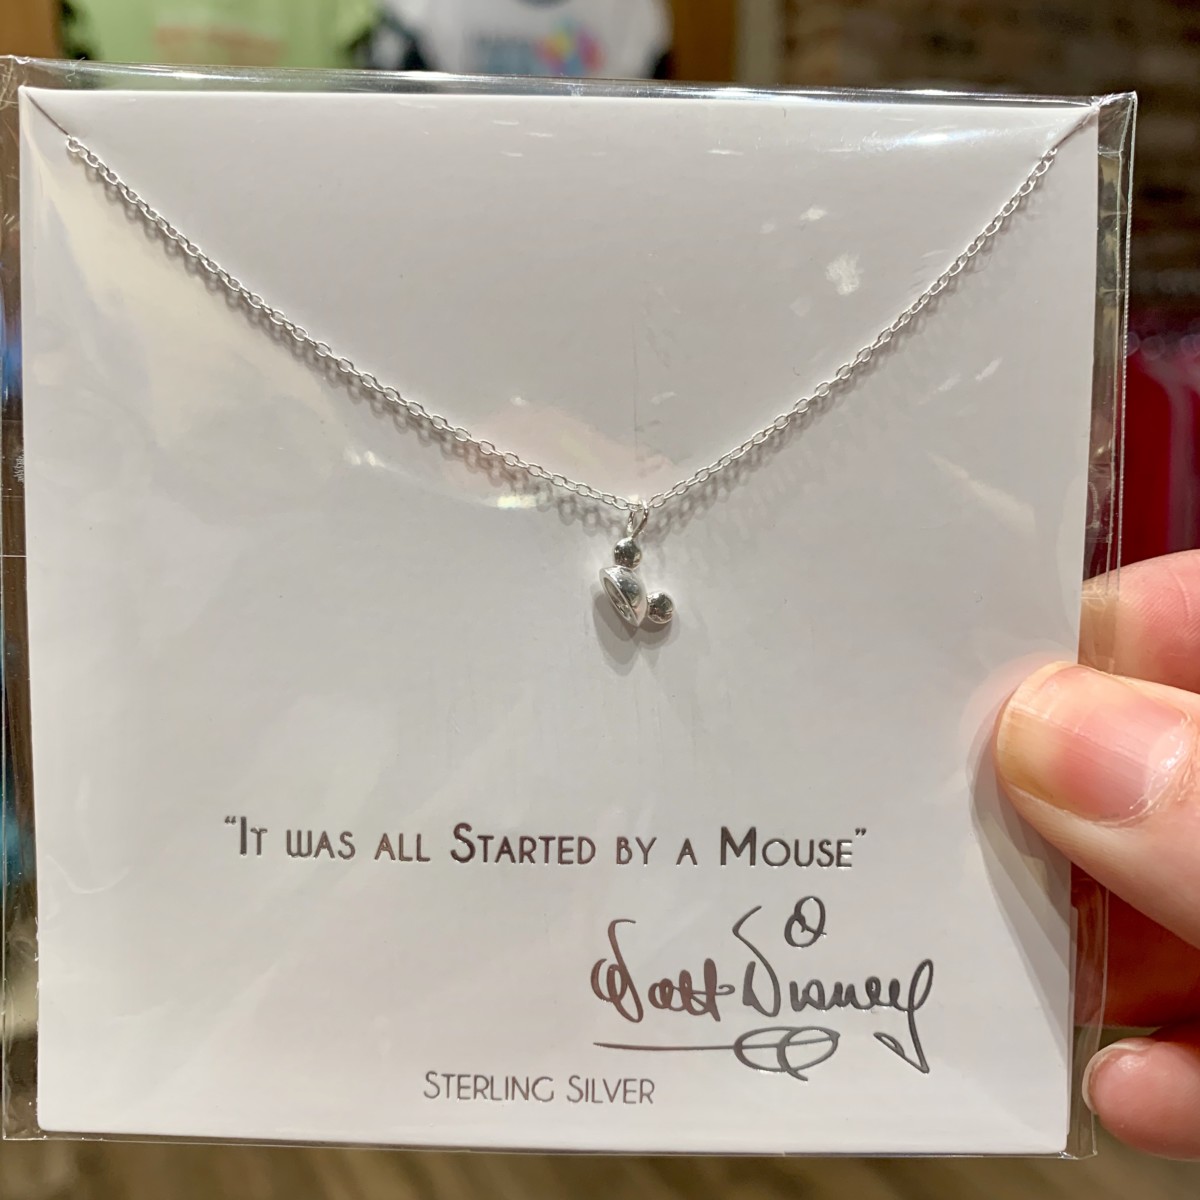 New Sterling Silver Necklaces Disney Parks Collection Jewelry World of Disney Disneyland Resort